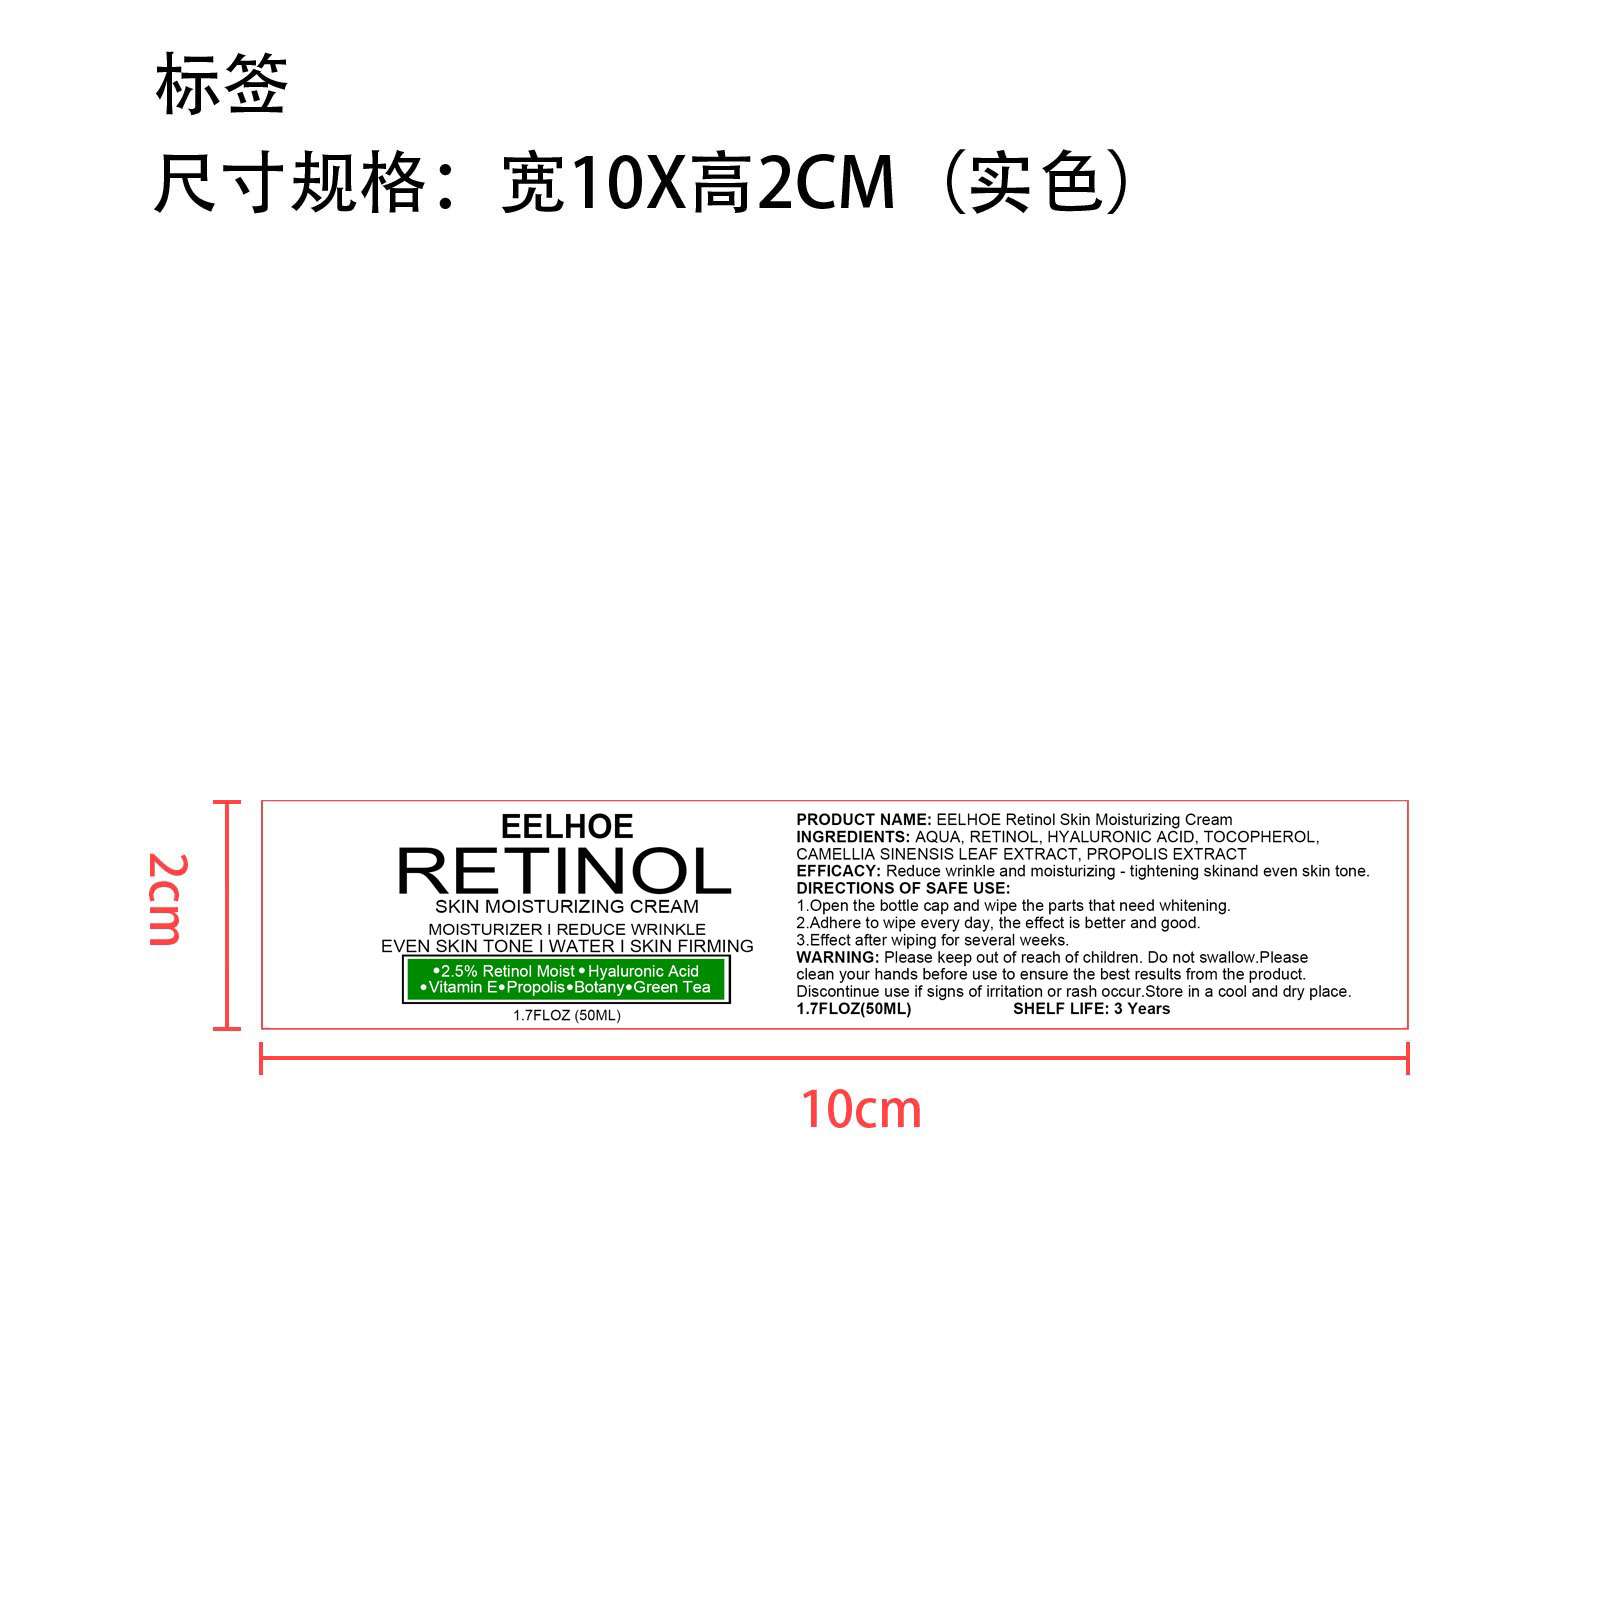  Package label